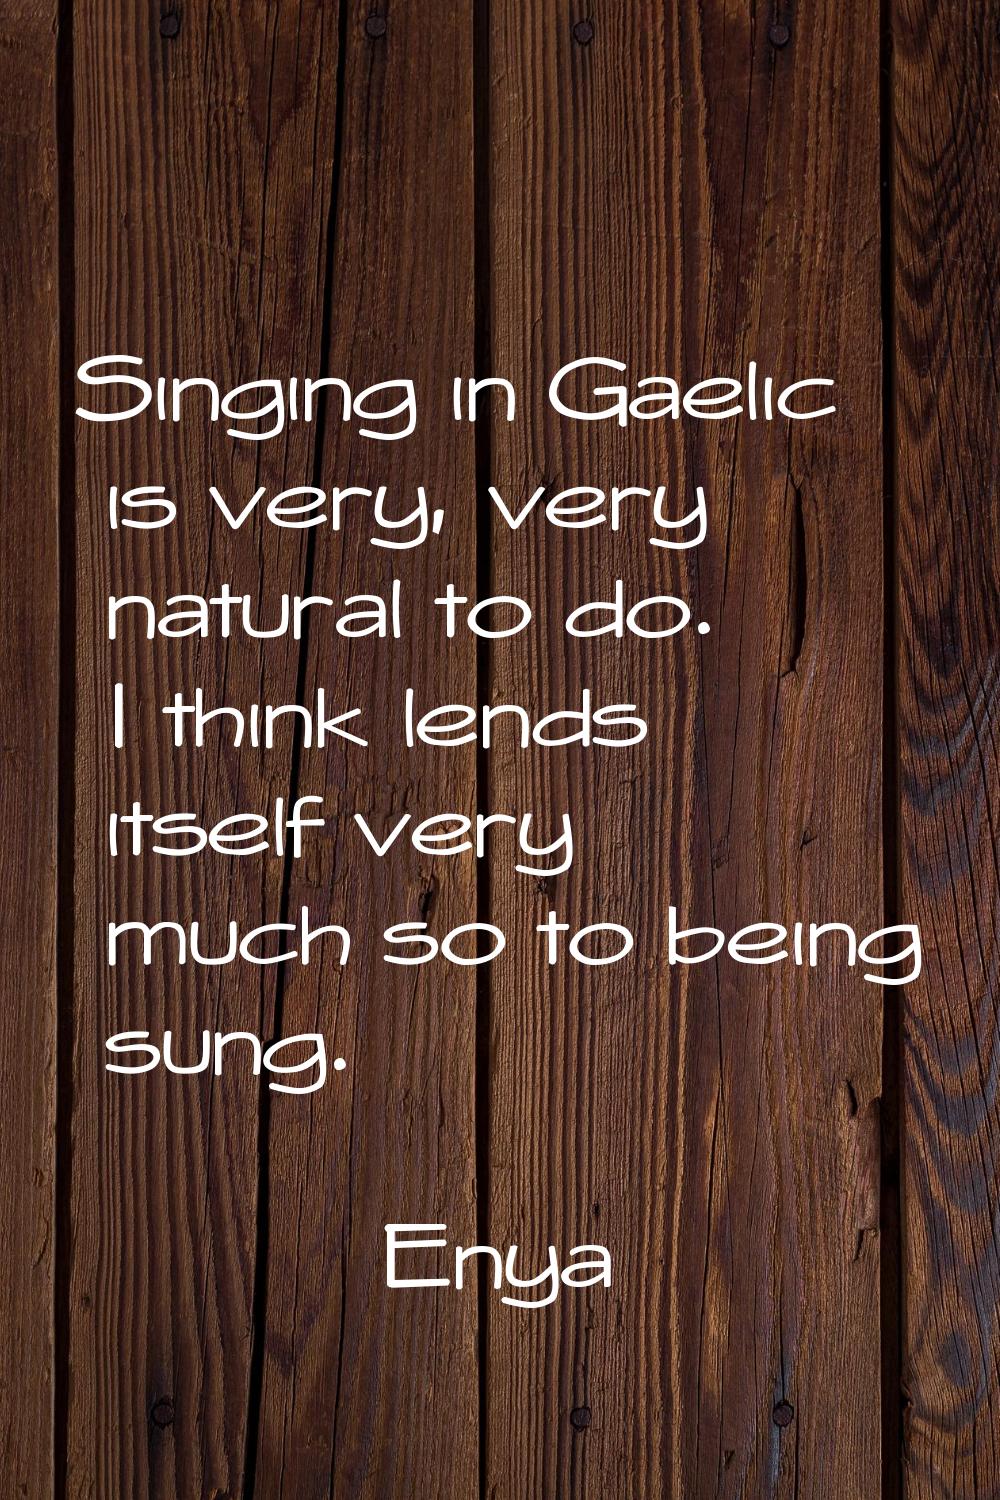 Singing in Gaelic is very, very natural to do. I think lends itself very much so to being sung.